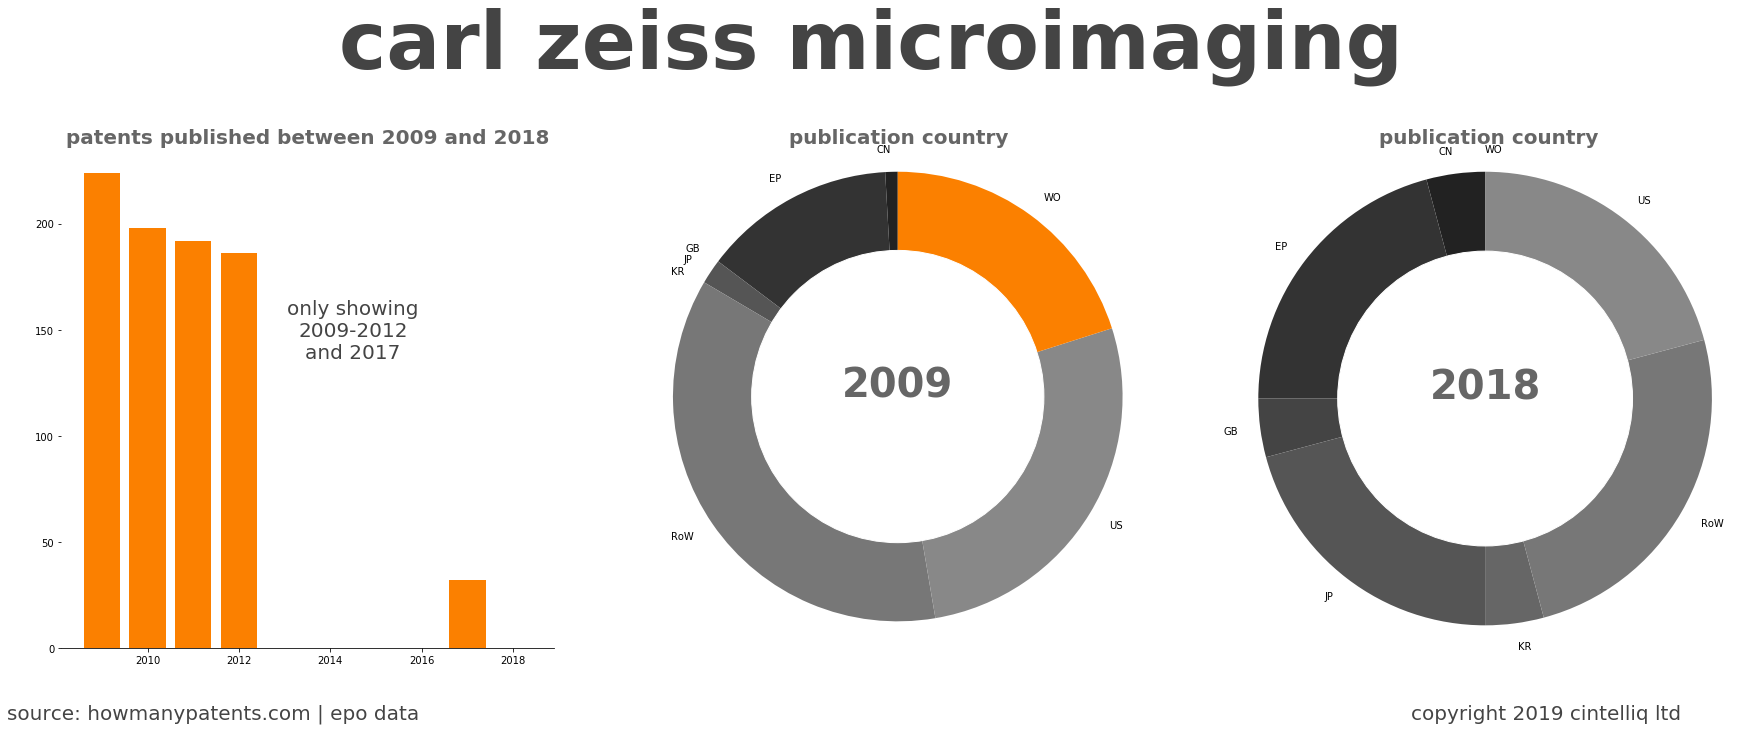 summary of patents for Carl Zeiss Microimaging